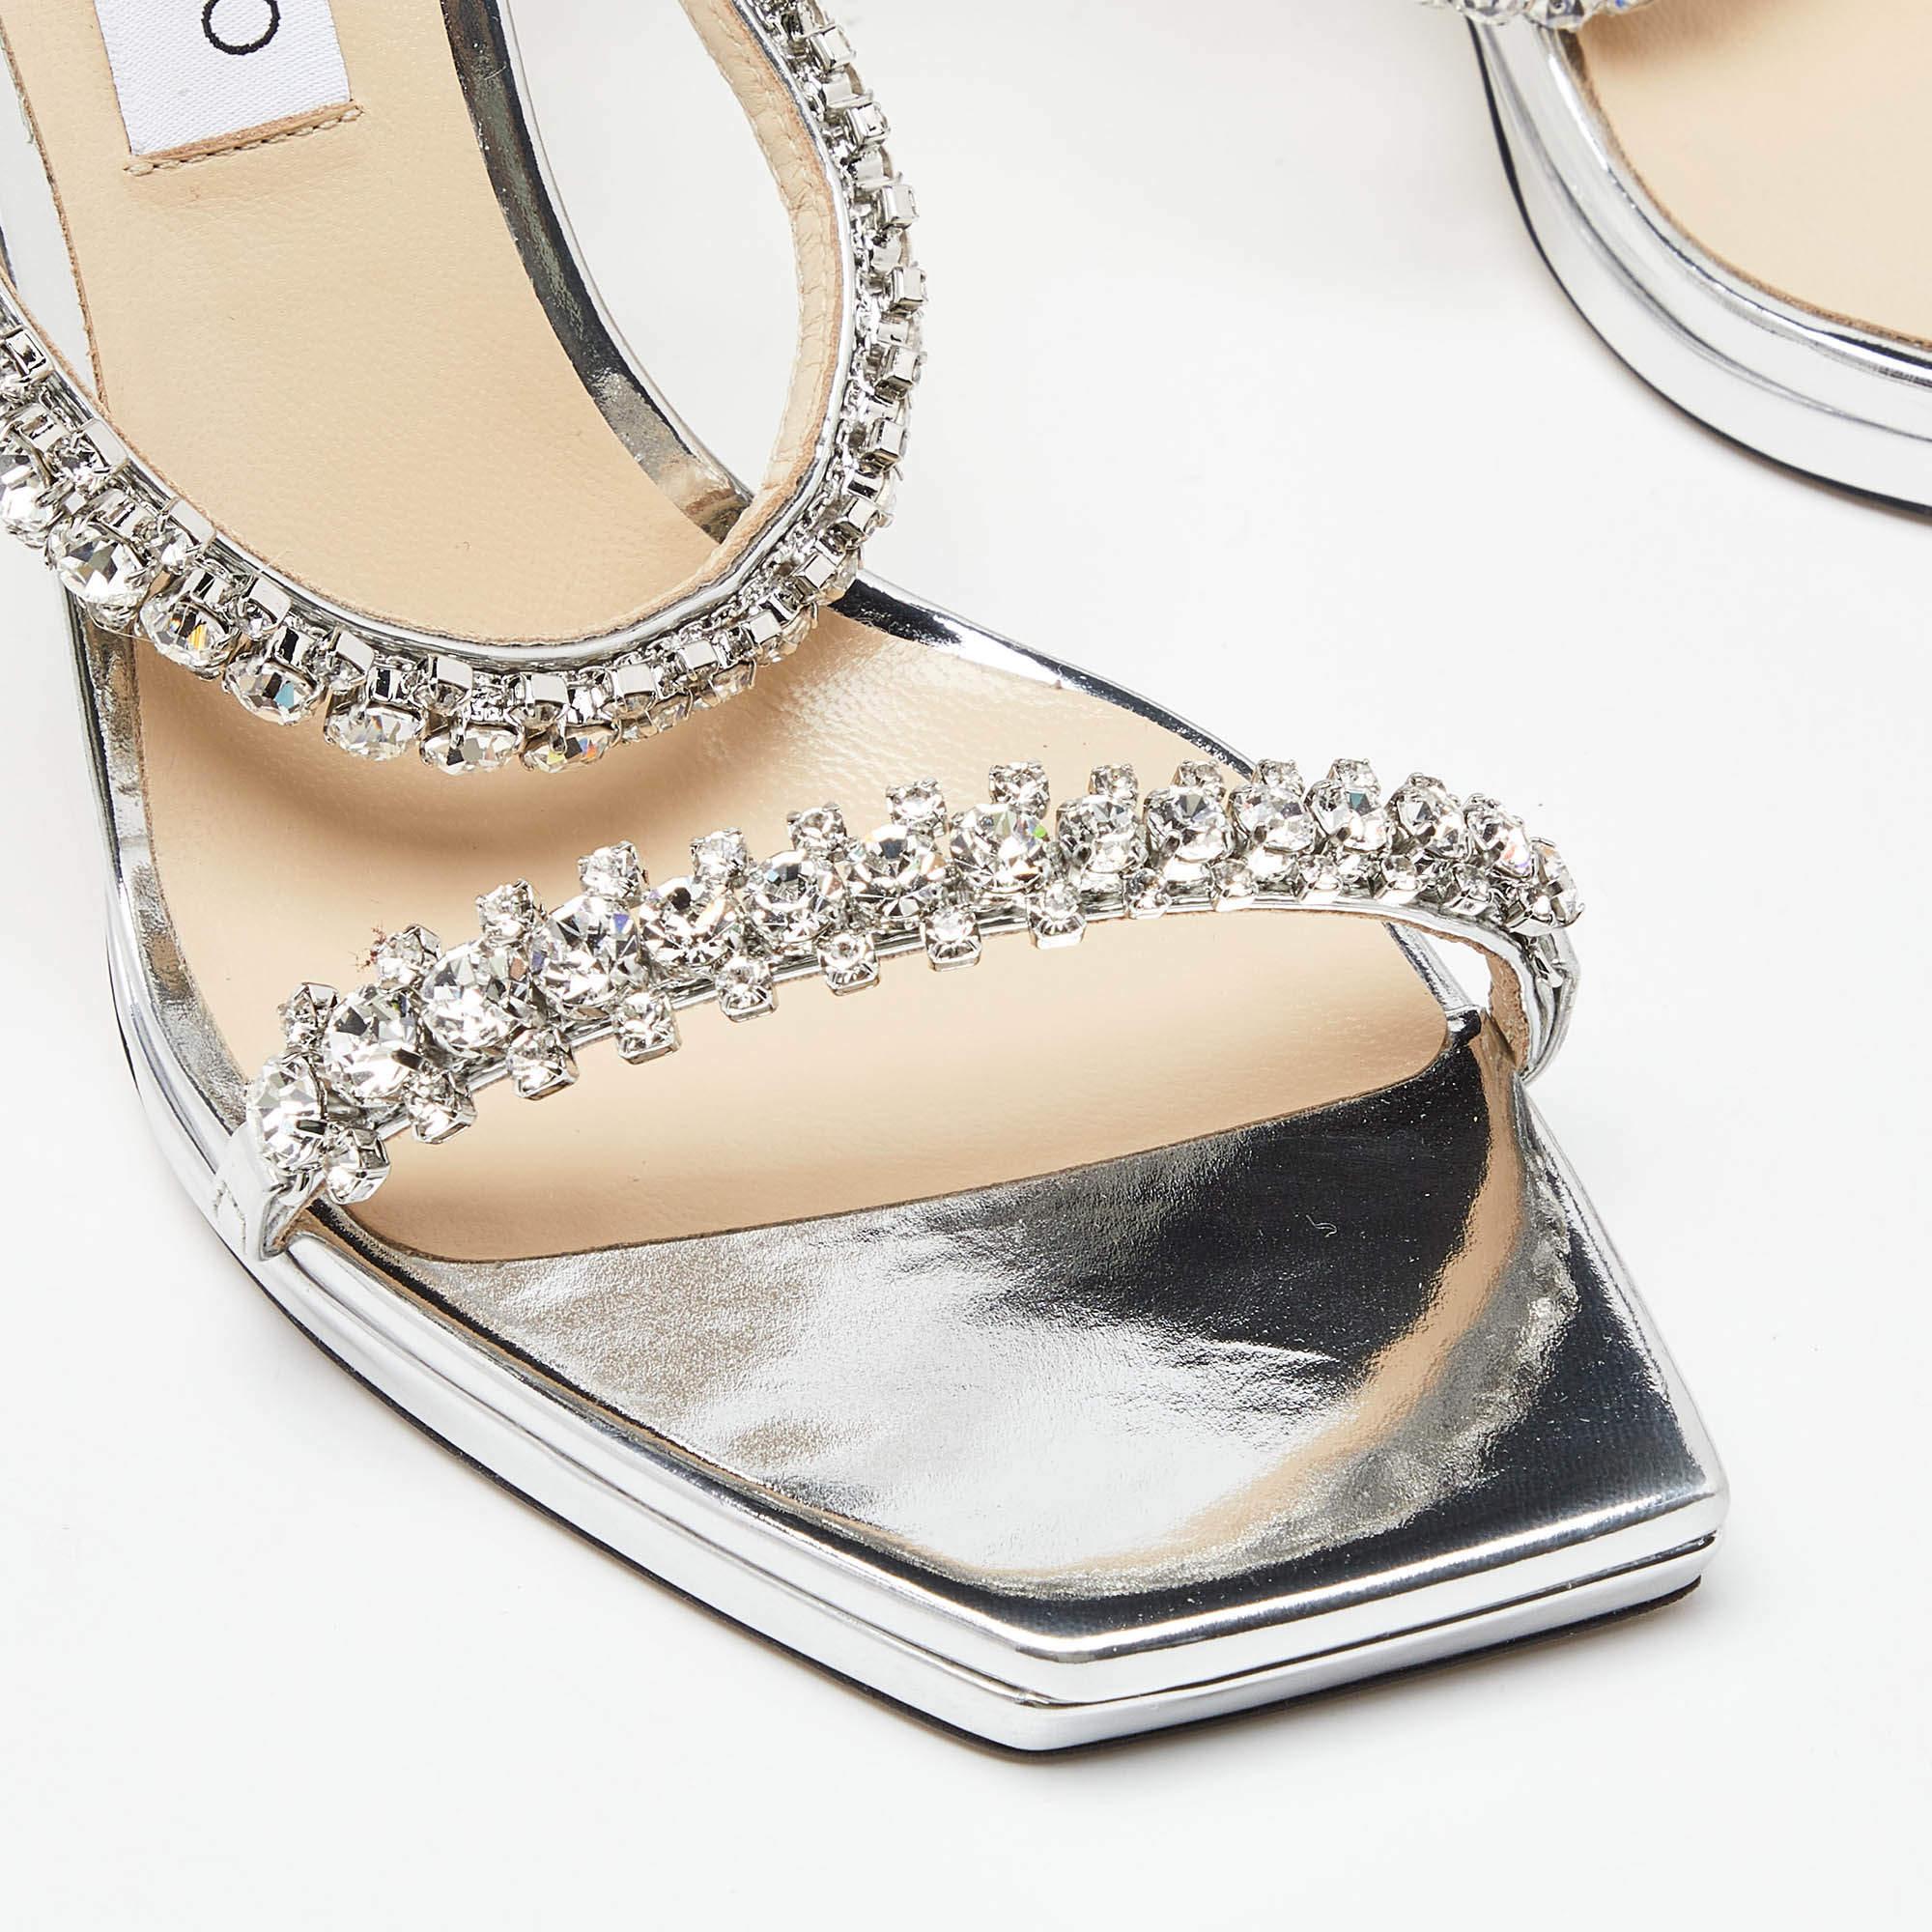 Jimmy Choo Silver Laminated Leather Crystal Embellished Ankle Strap Sandals Size In Excellent Condition For Sale In Dubai, Al Qouz 2